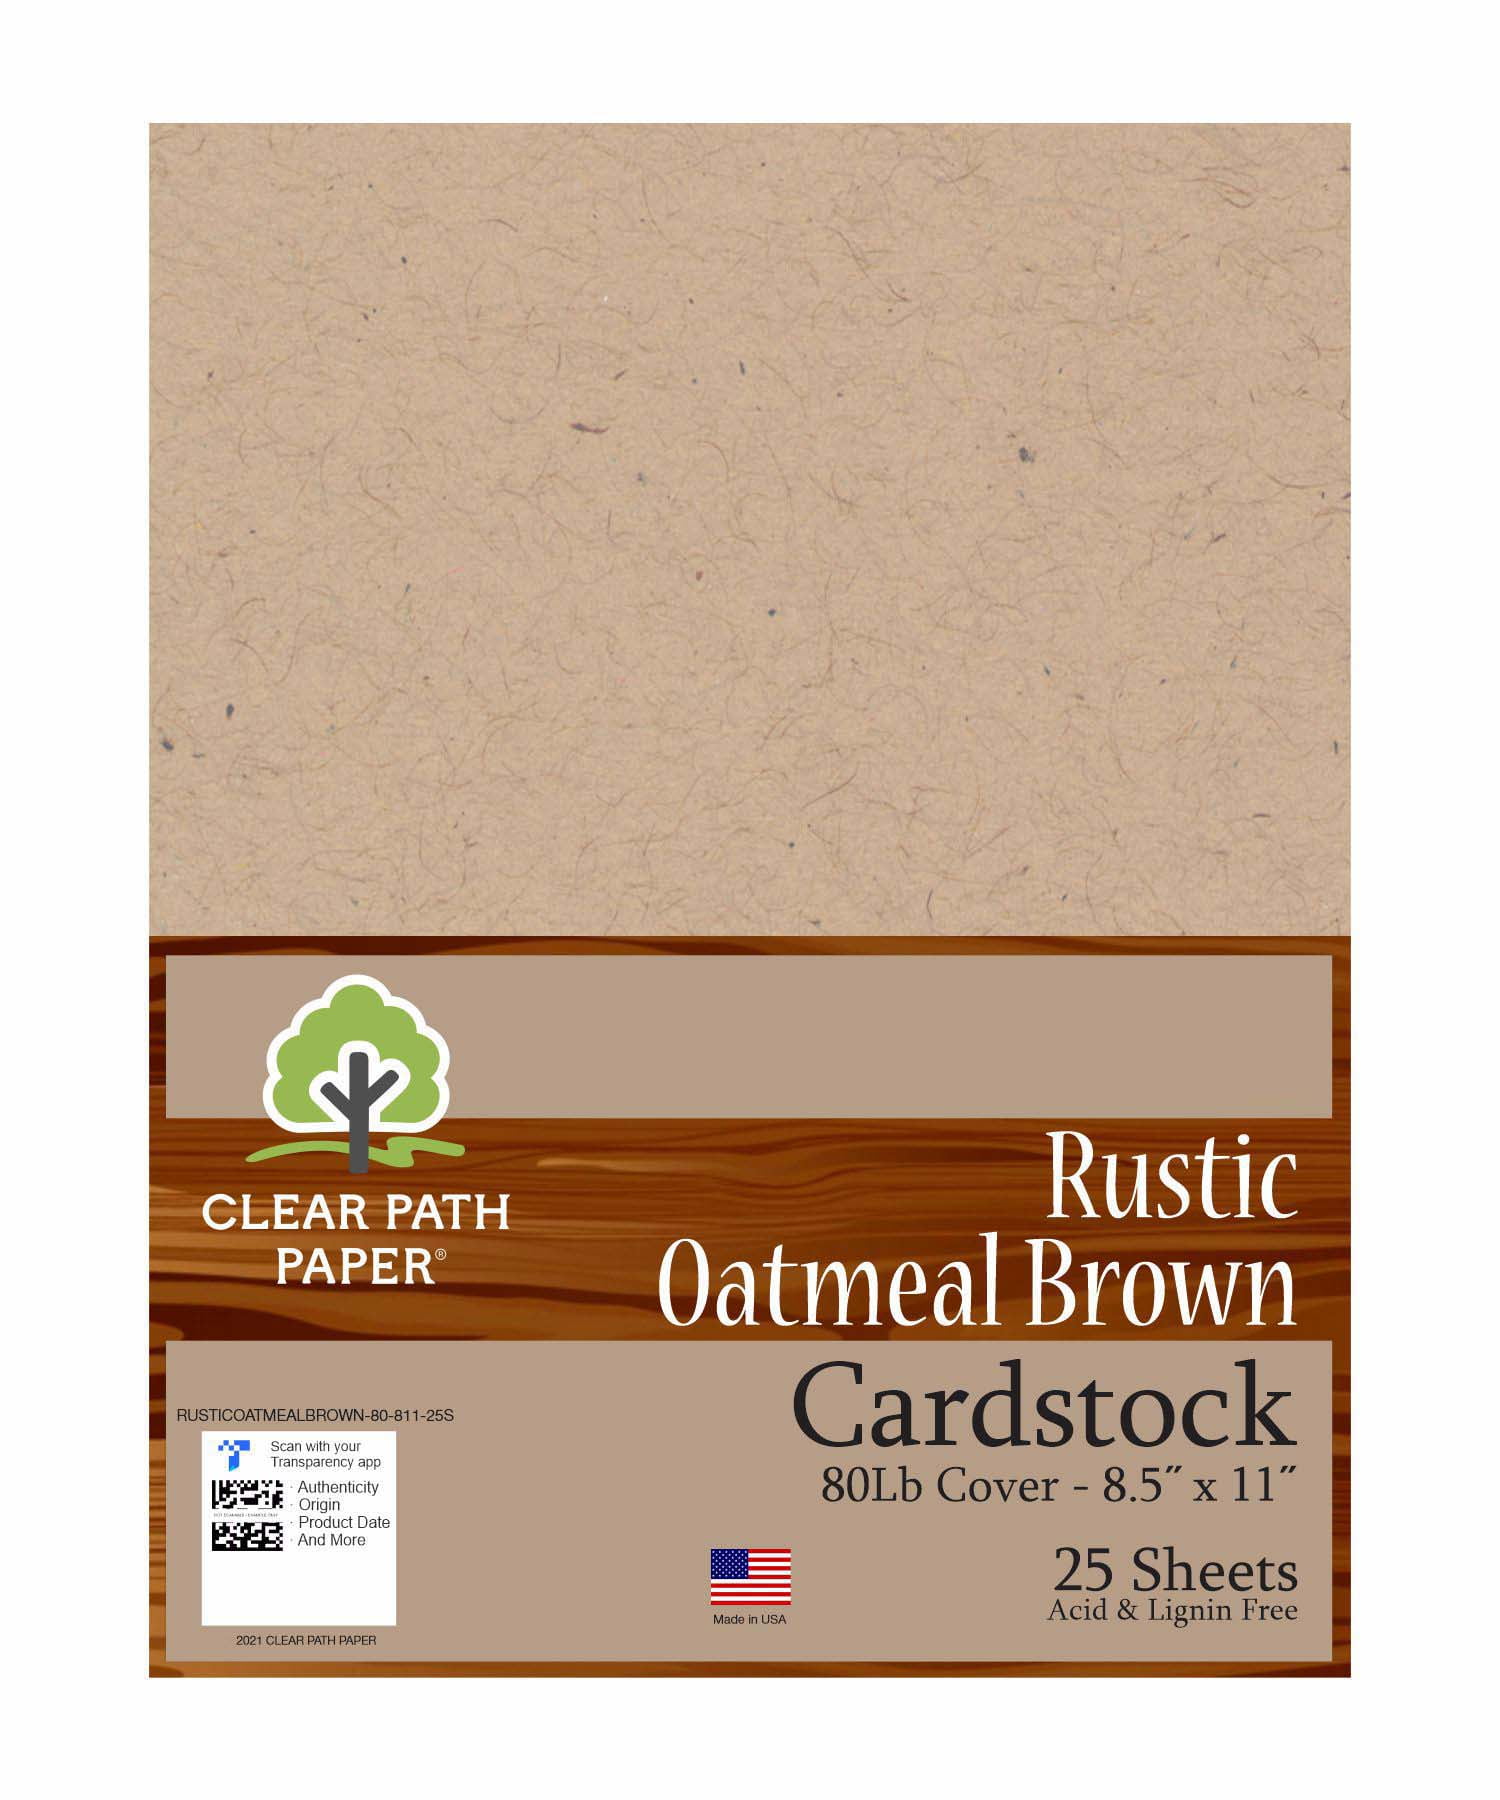 Rustic Oatmeal Brown Cardstock - 8.5 x 11 inch - 80lb Cover - 50 Sheets - Clear Path Paper